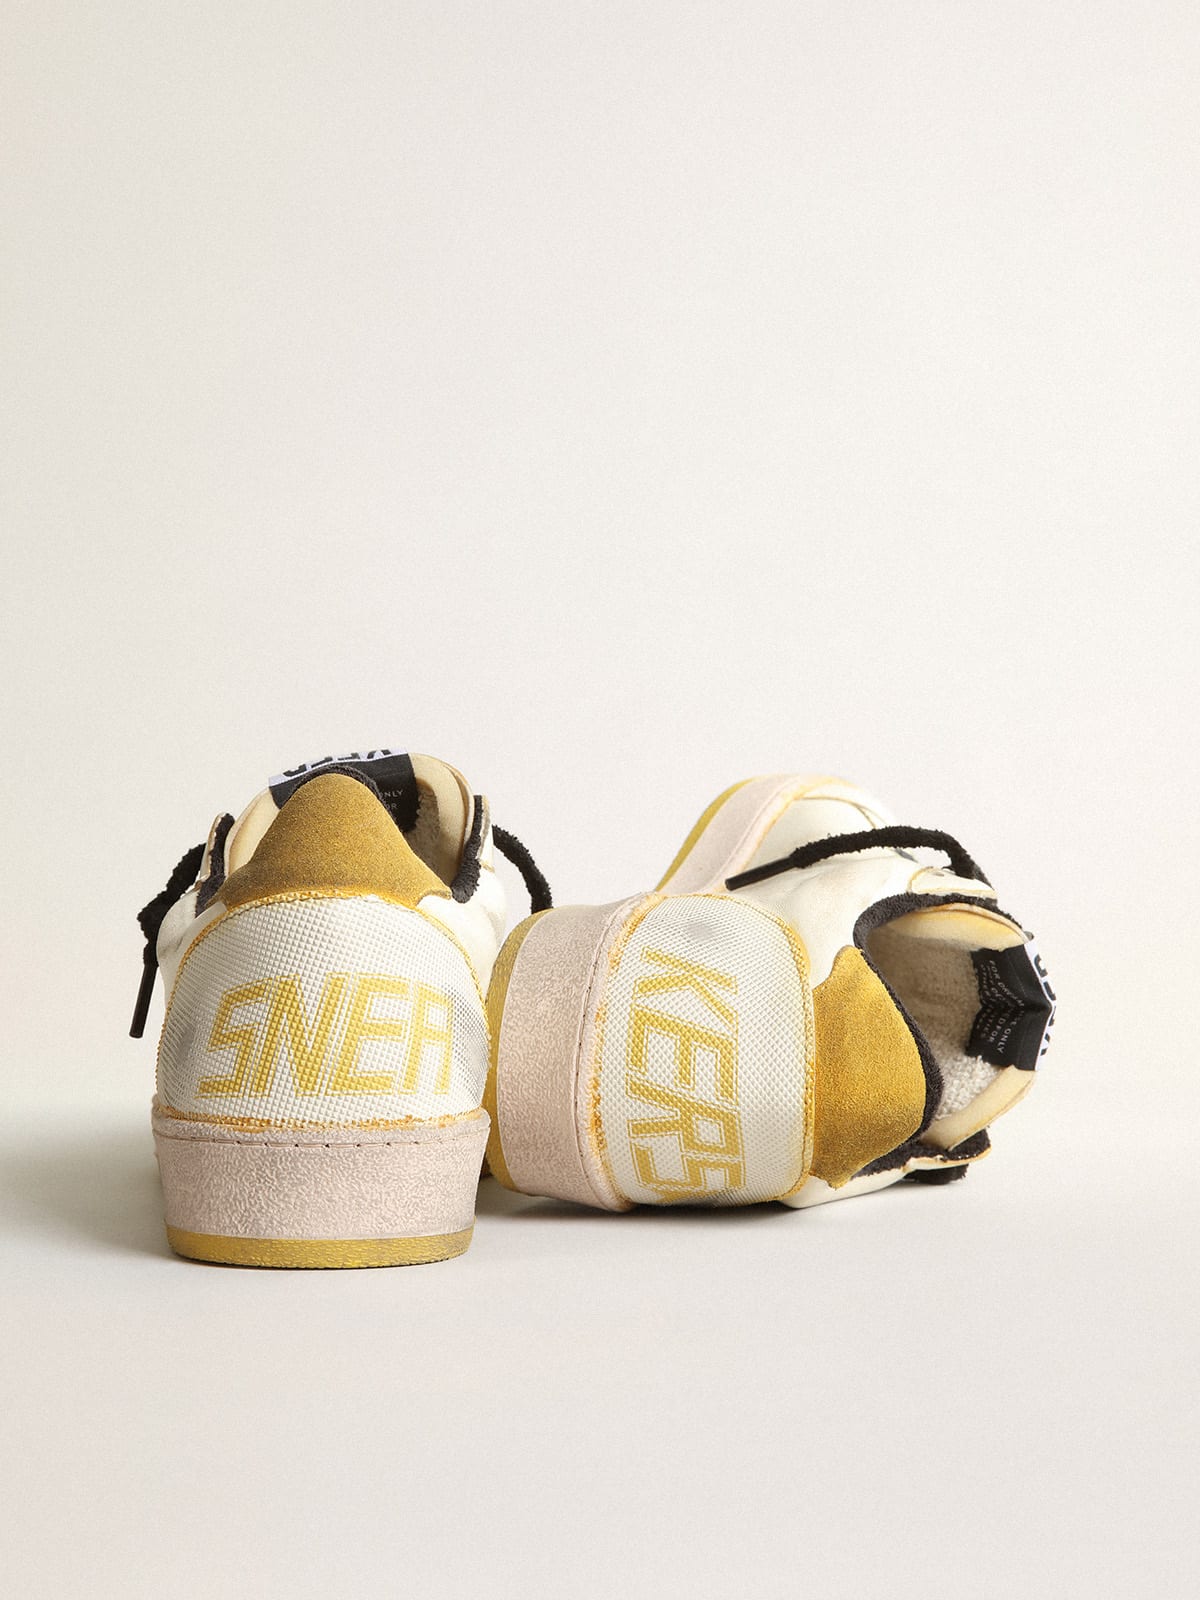 Golden Goose - Men’s Ball Star Pro in cream nappa with rubber inserts in 